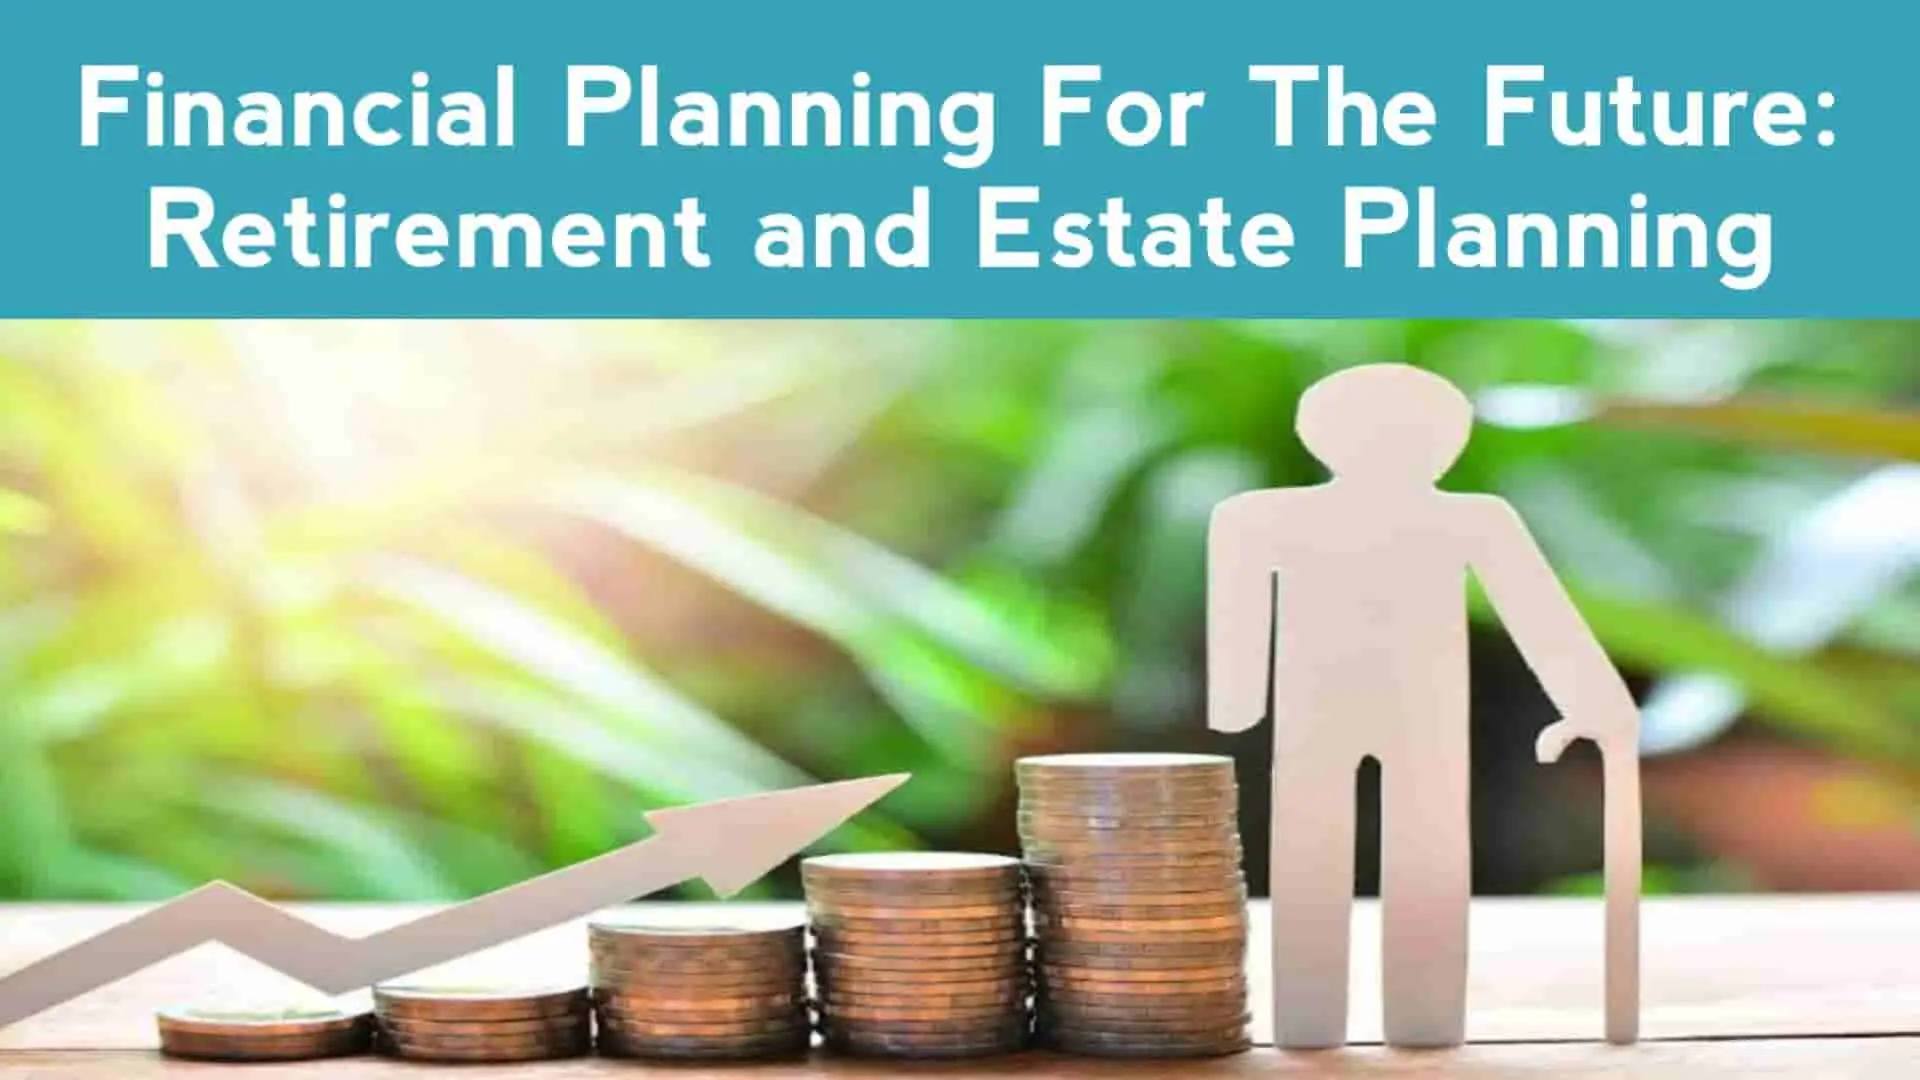 Financial Planning for the Future: Retirement and Estate Planning